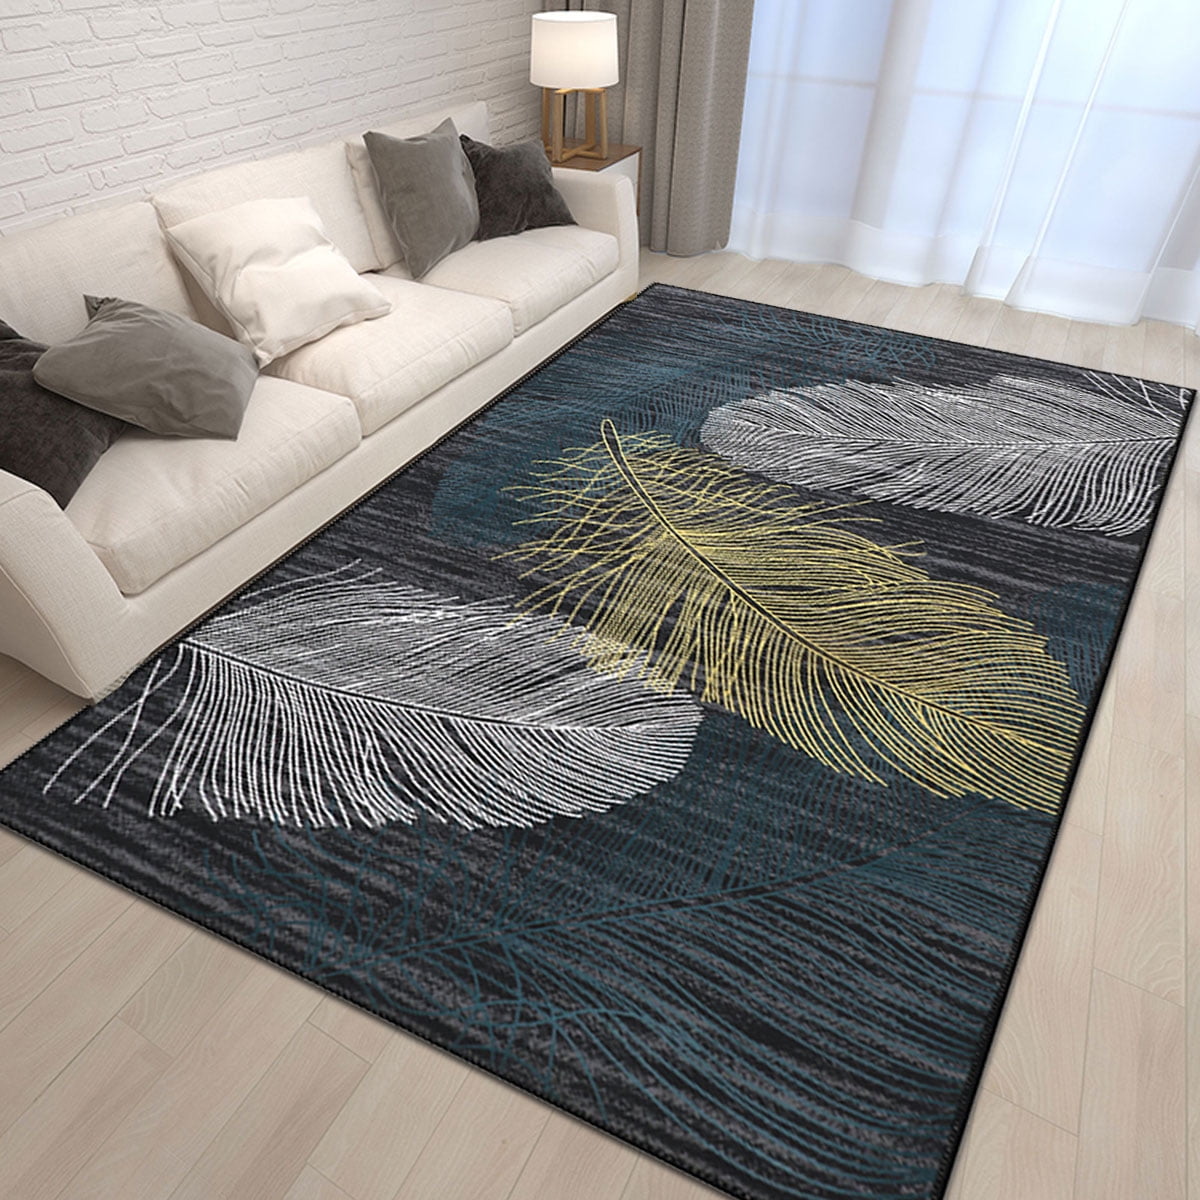 Large Living Room Rug Mat Runner Carpet Hallway Bedroom Abstract Thick Soft mat 